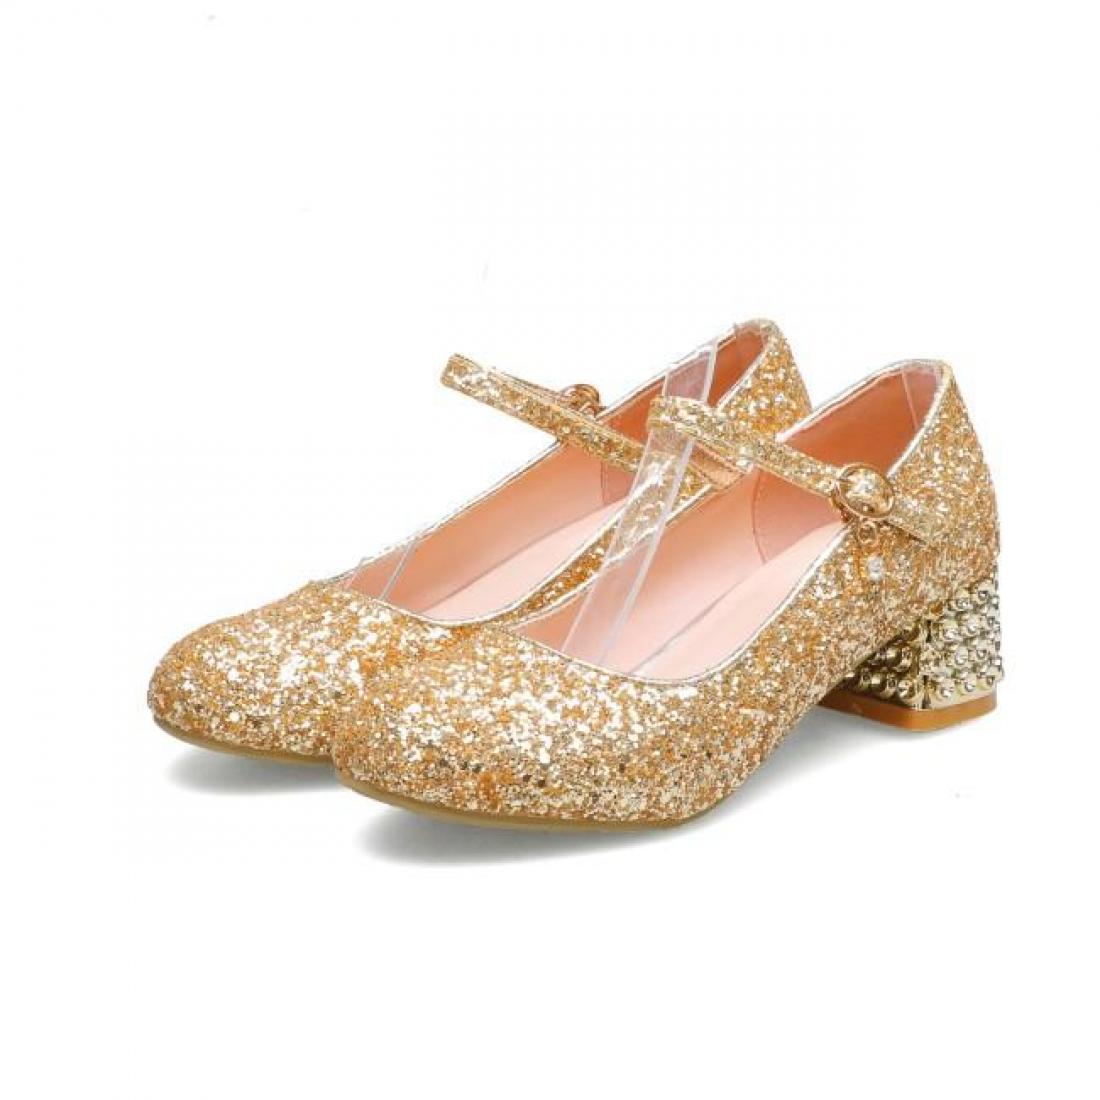 Gold Glitters Bling Party Wedding Bridal Mary Jane Heels ...